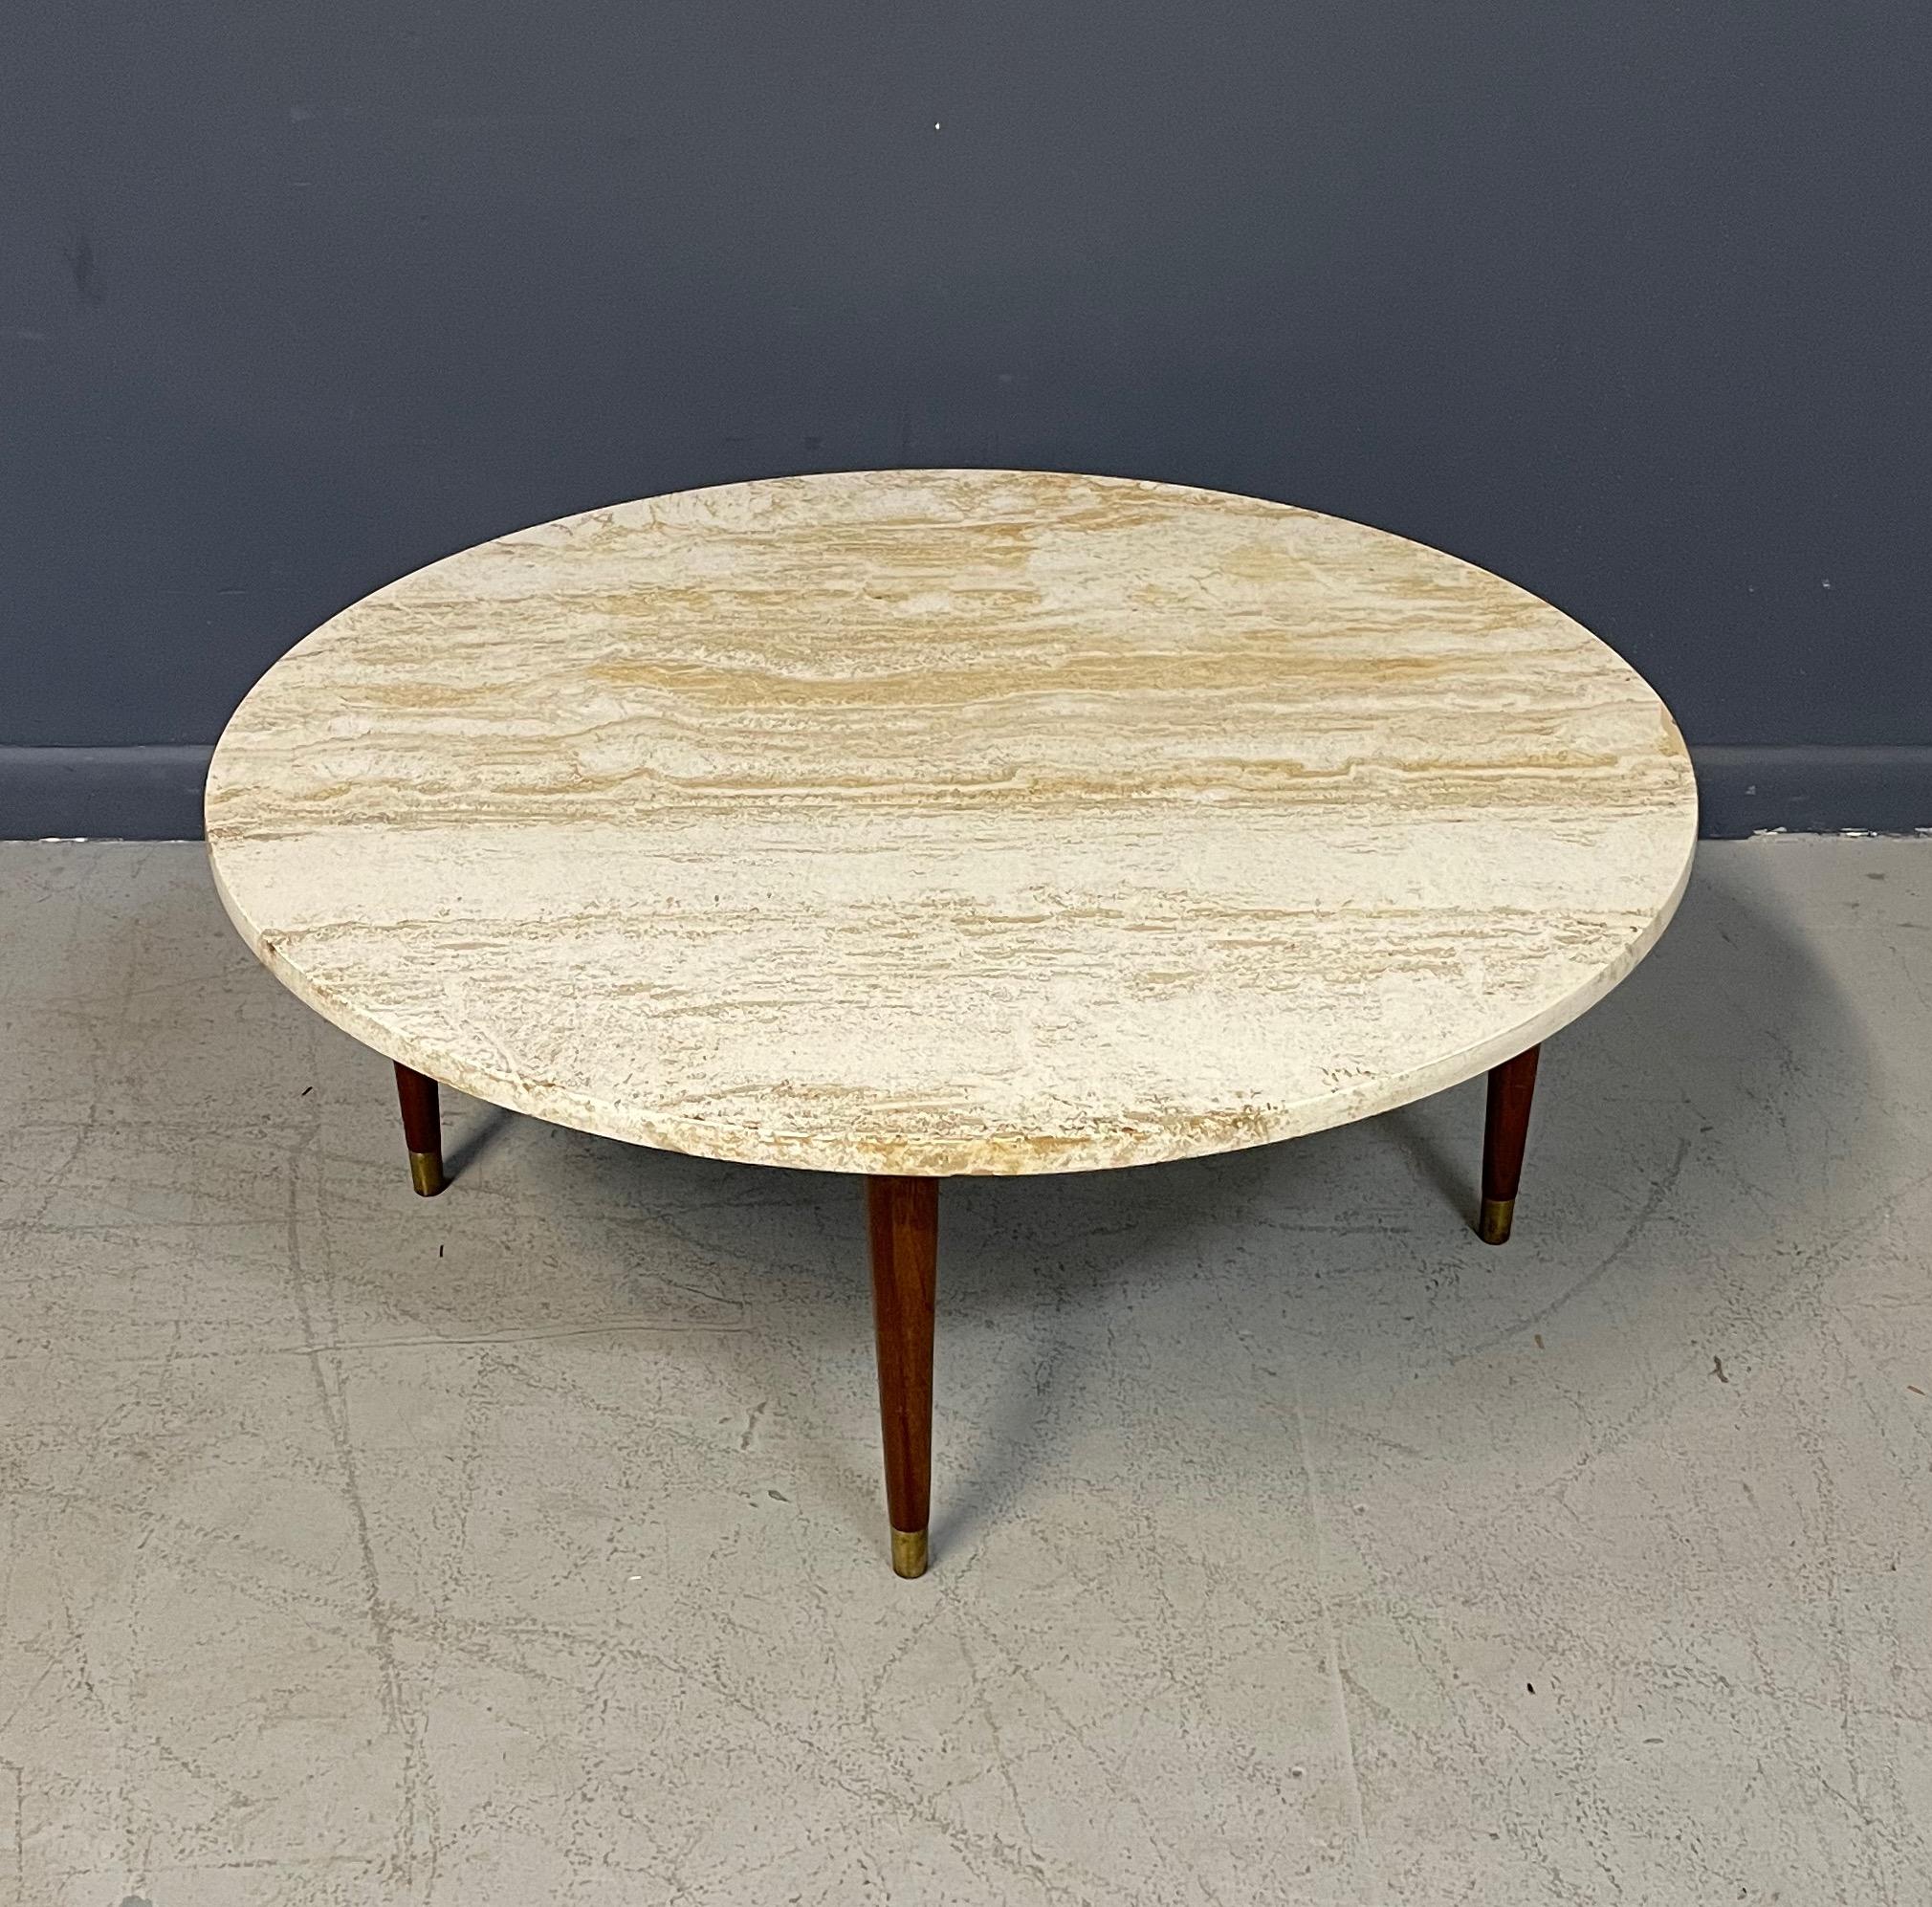 Travertine coffee table with walnut legs in a very usable size that would work well in numerous settings including a small apartment setting. This piece is classic mid century design pairing stone and would with nice brass accents.